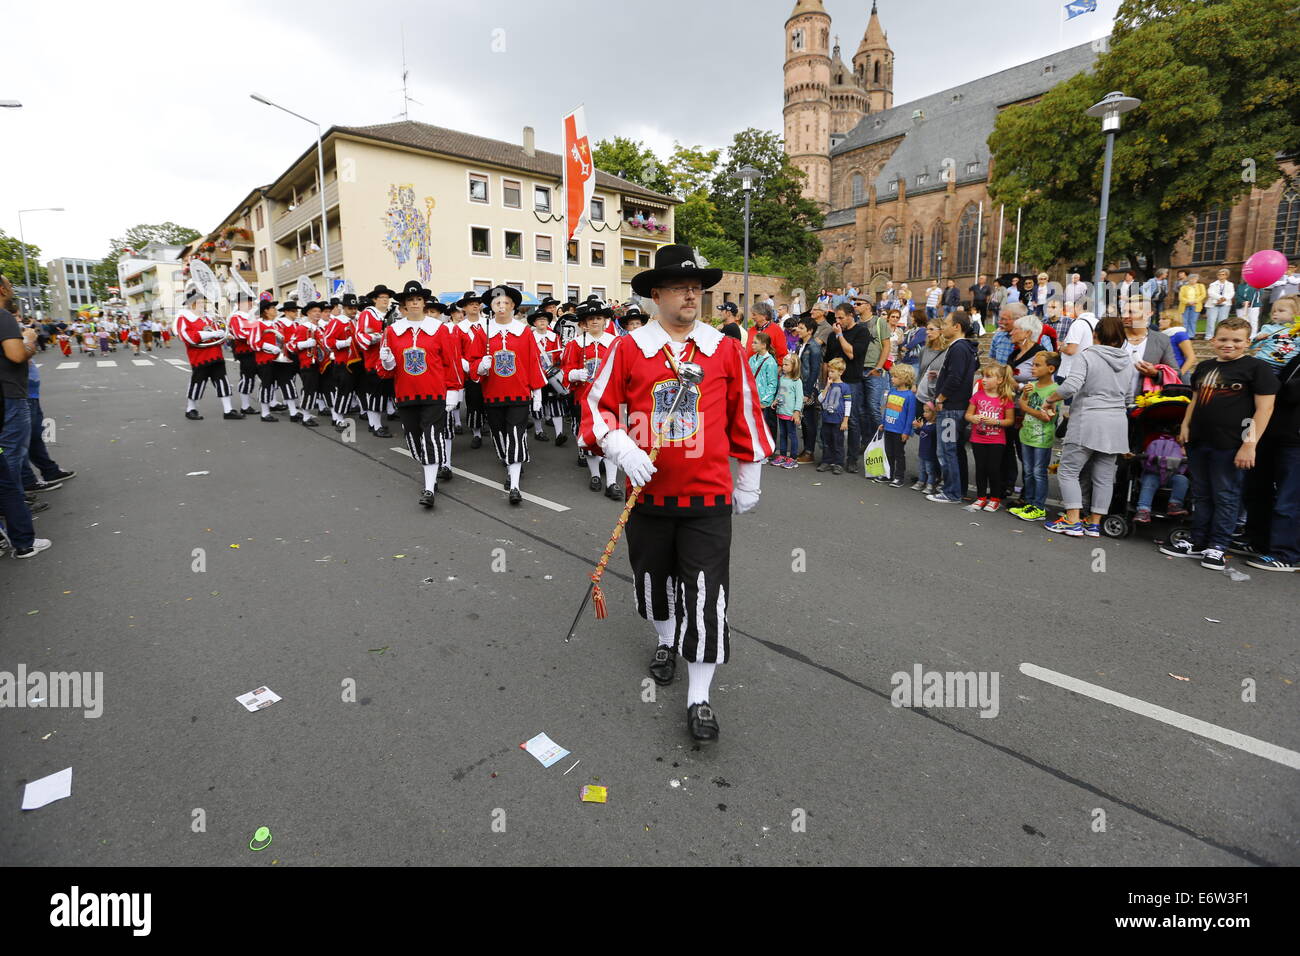 Worms, Germany. 31st August 2014. Members of the Fanfaren- und Spielmannszug Altenstadt e.V. march in the Backfischfest parade 2014. The first highlight of this year's Backfischfest was the big parade through the city of Worms with 125 groups and floats. Community groups, sport clubs, music groups and business from Worms and further afield took part. Credit:  Michael Debets/Alamy Live News Stock Photo